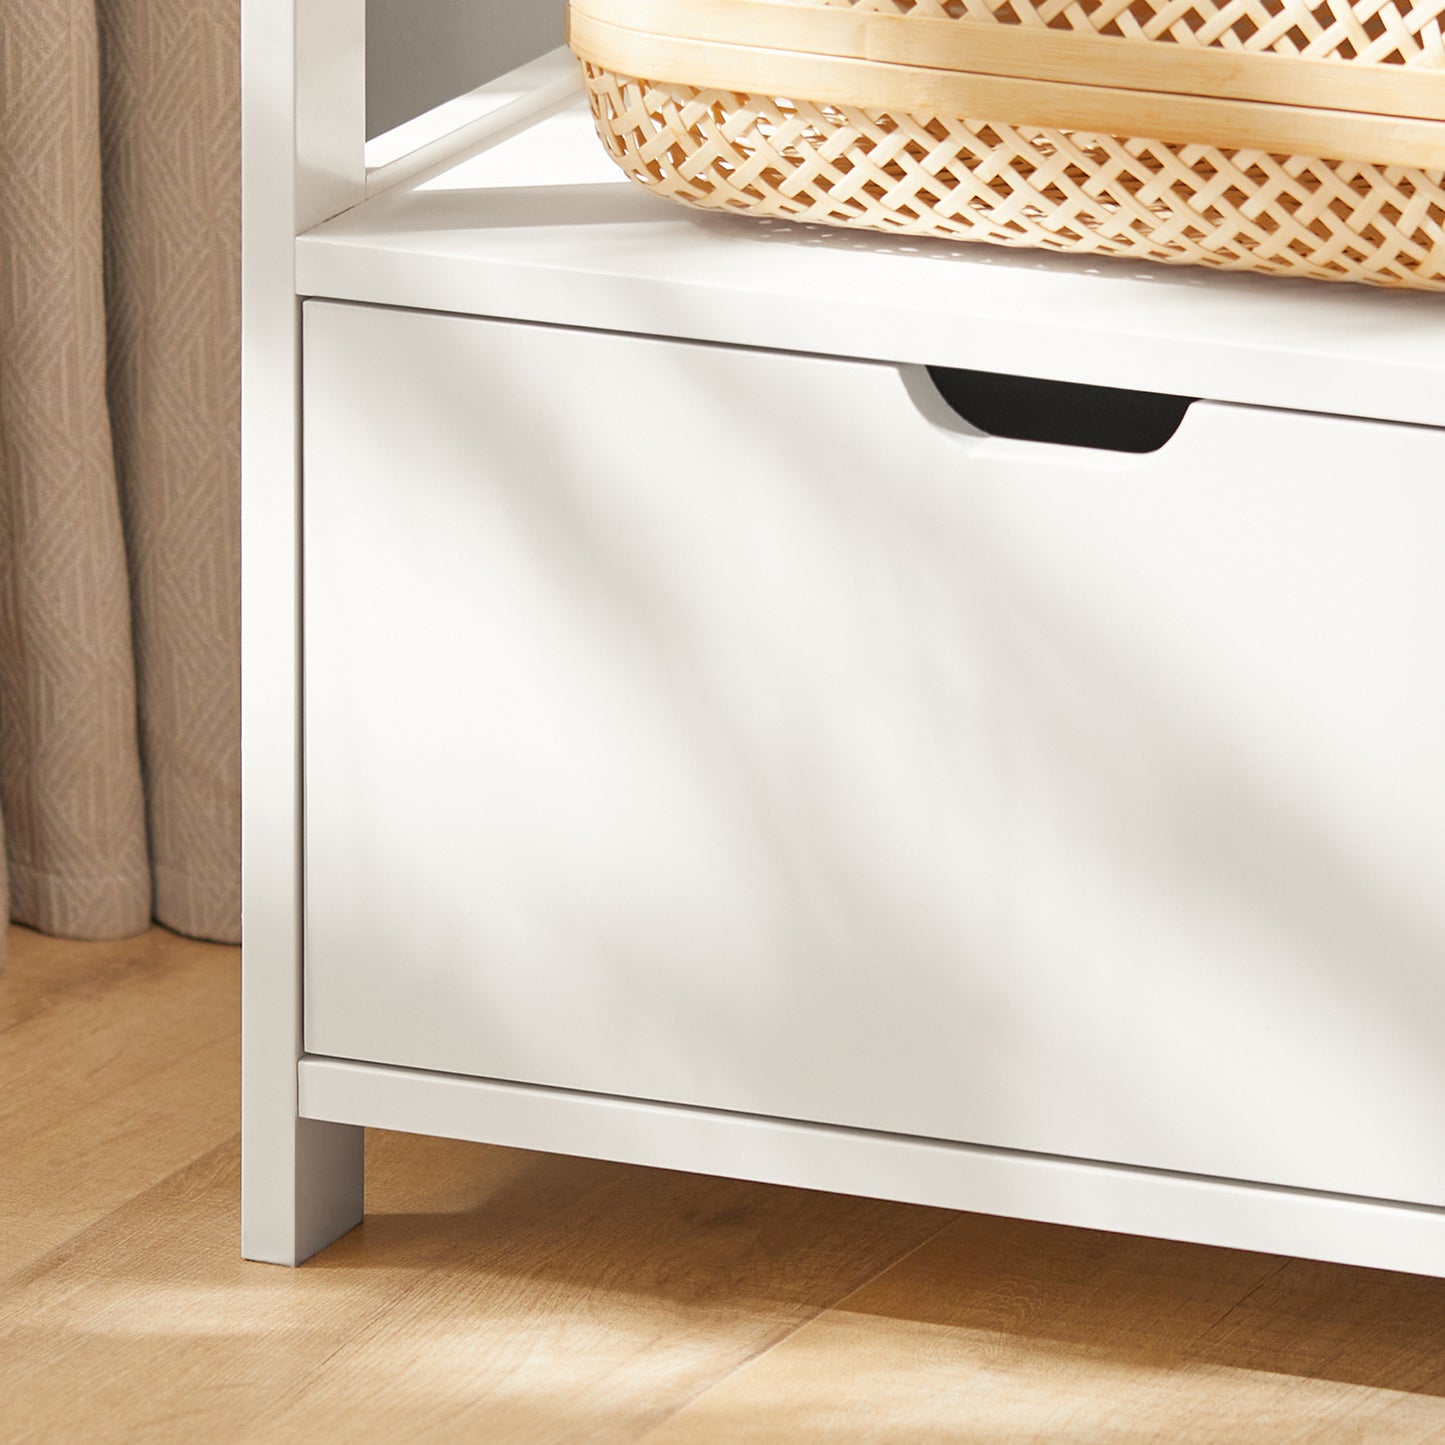 SoBuy FRG258-W Bedside Table with 2 Drawers, Side Table, Lamp Table, Night Stand, End Table, White